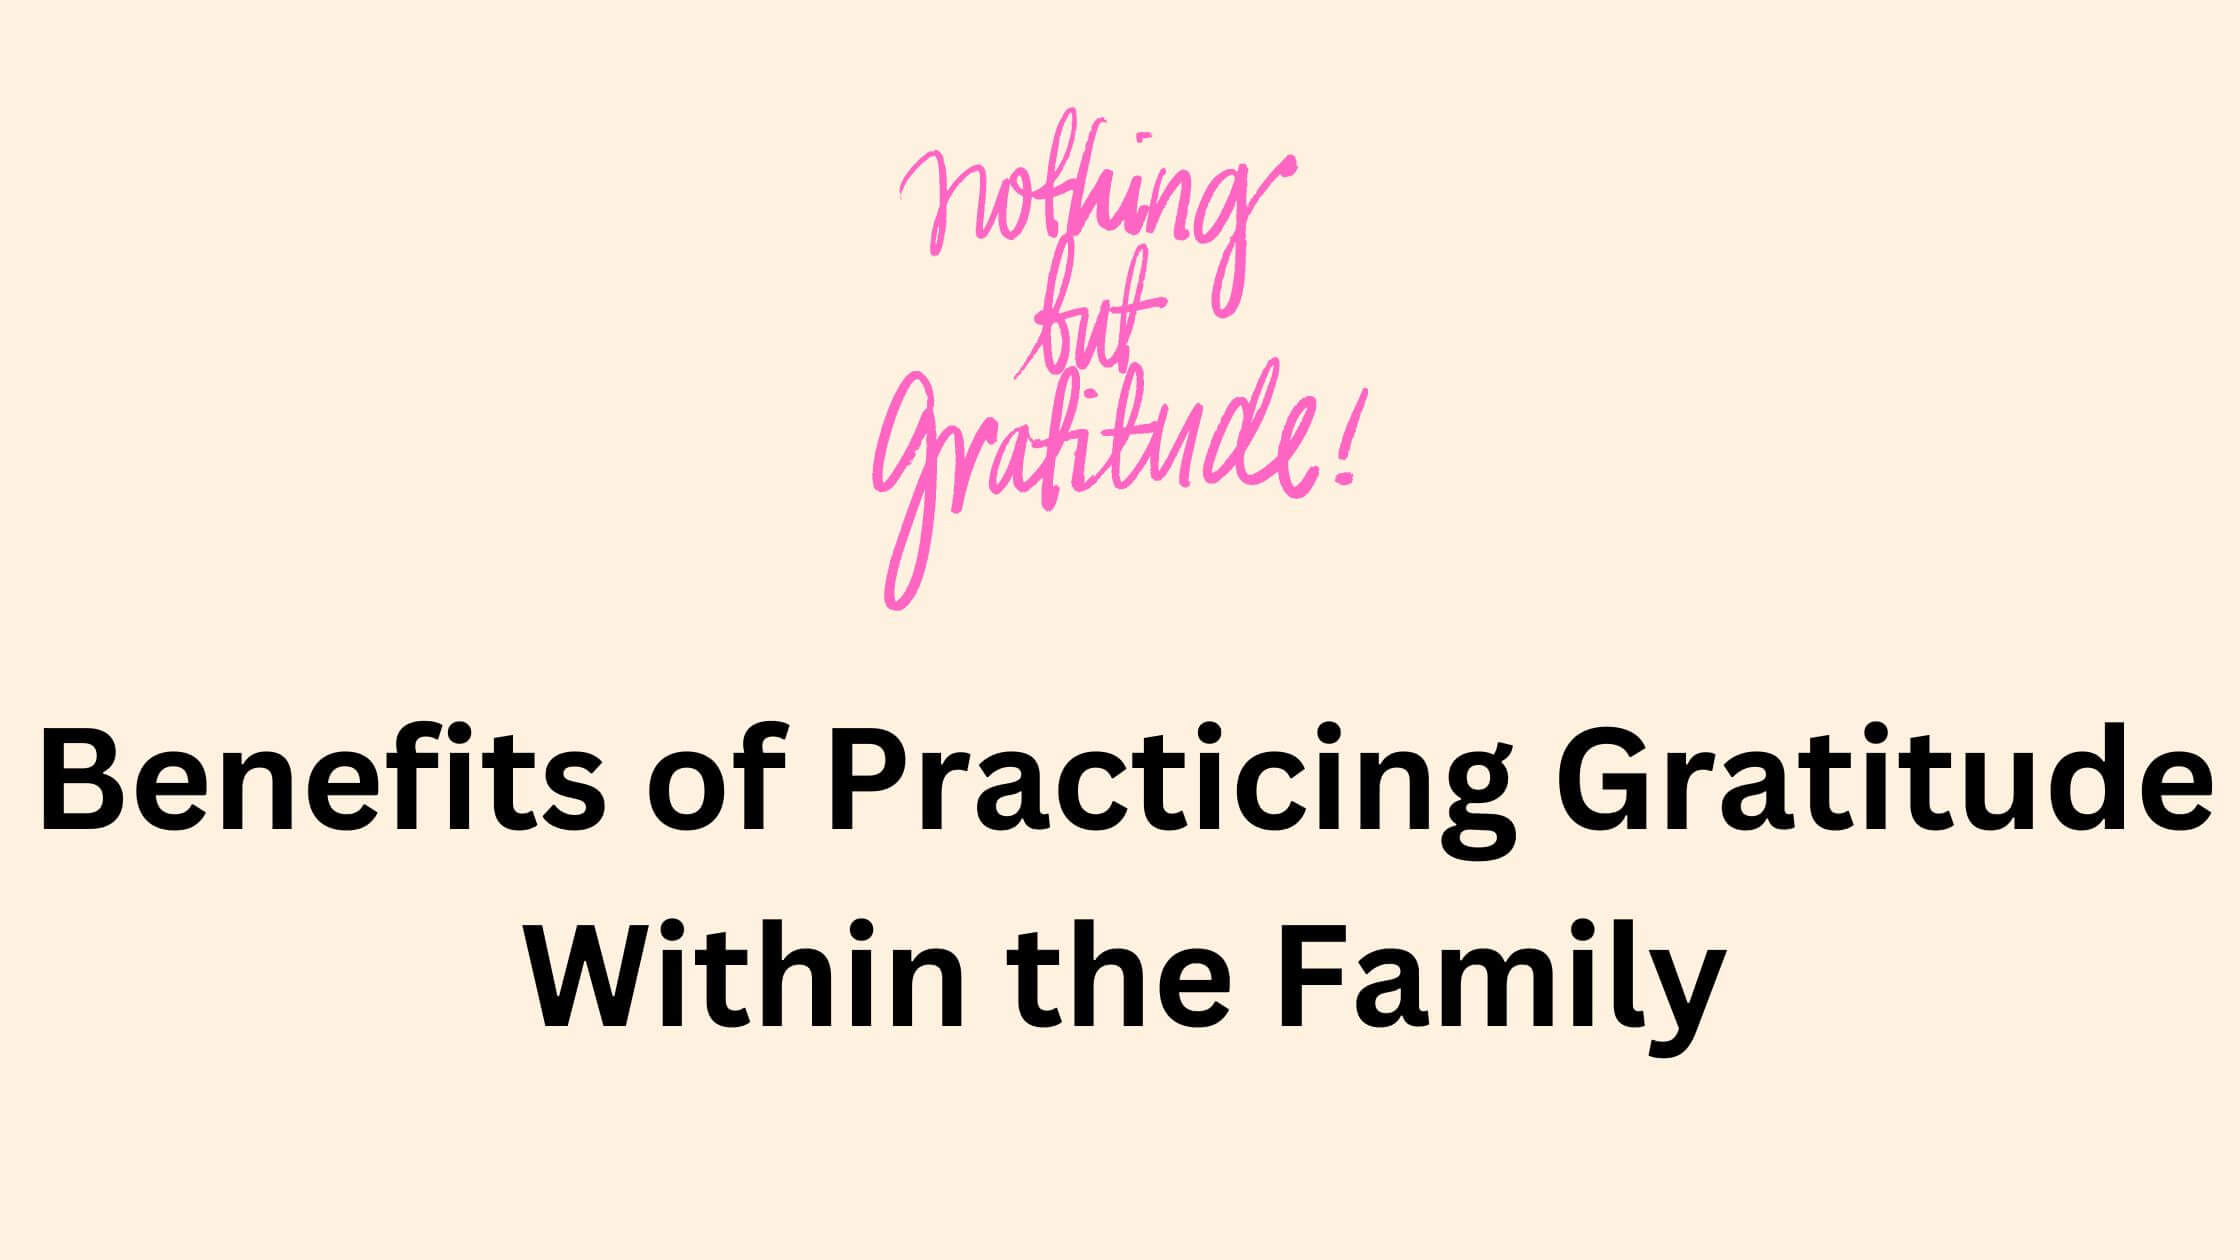 Benefits of Practicing Gratitude Within the Family